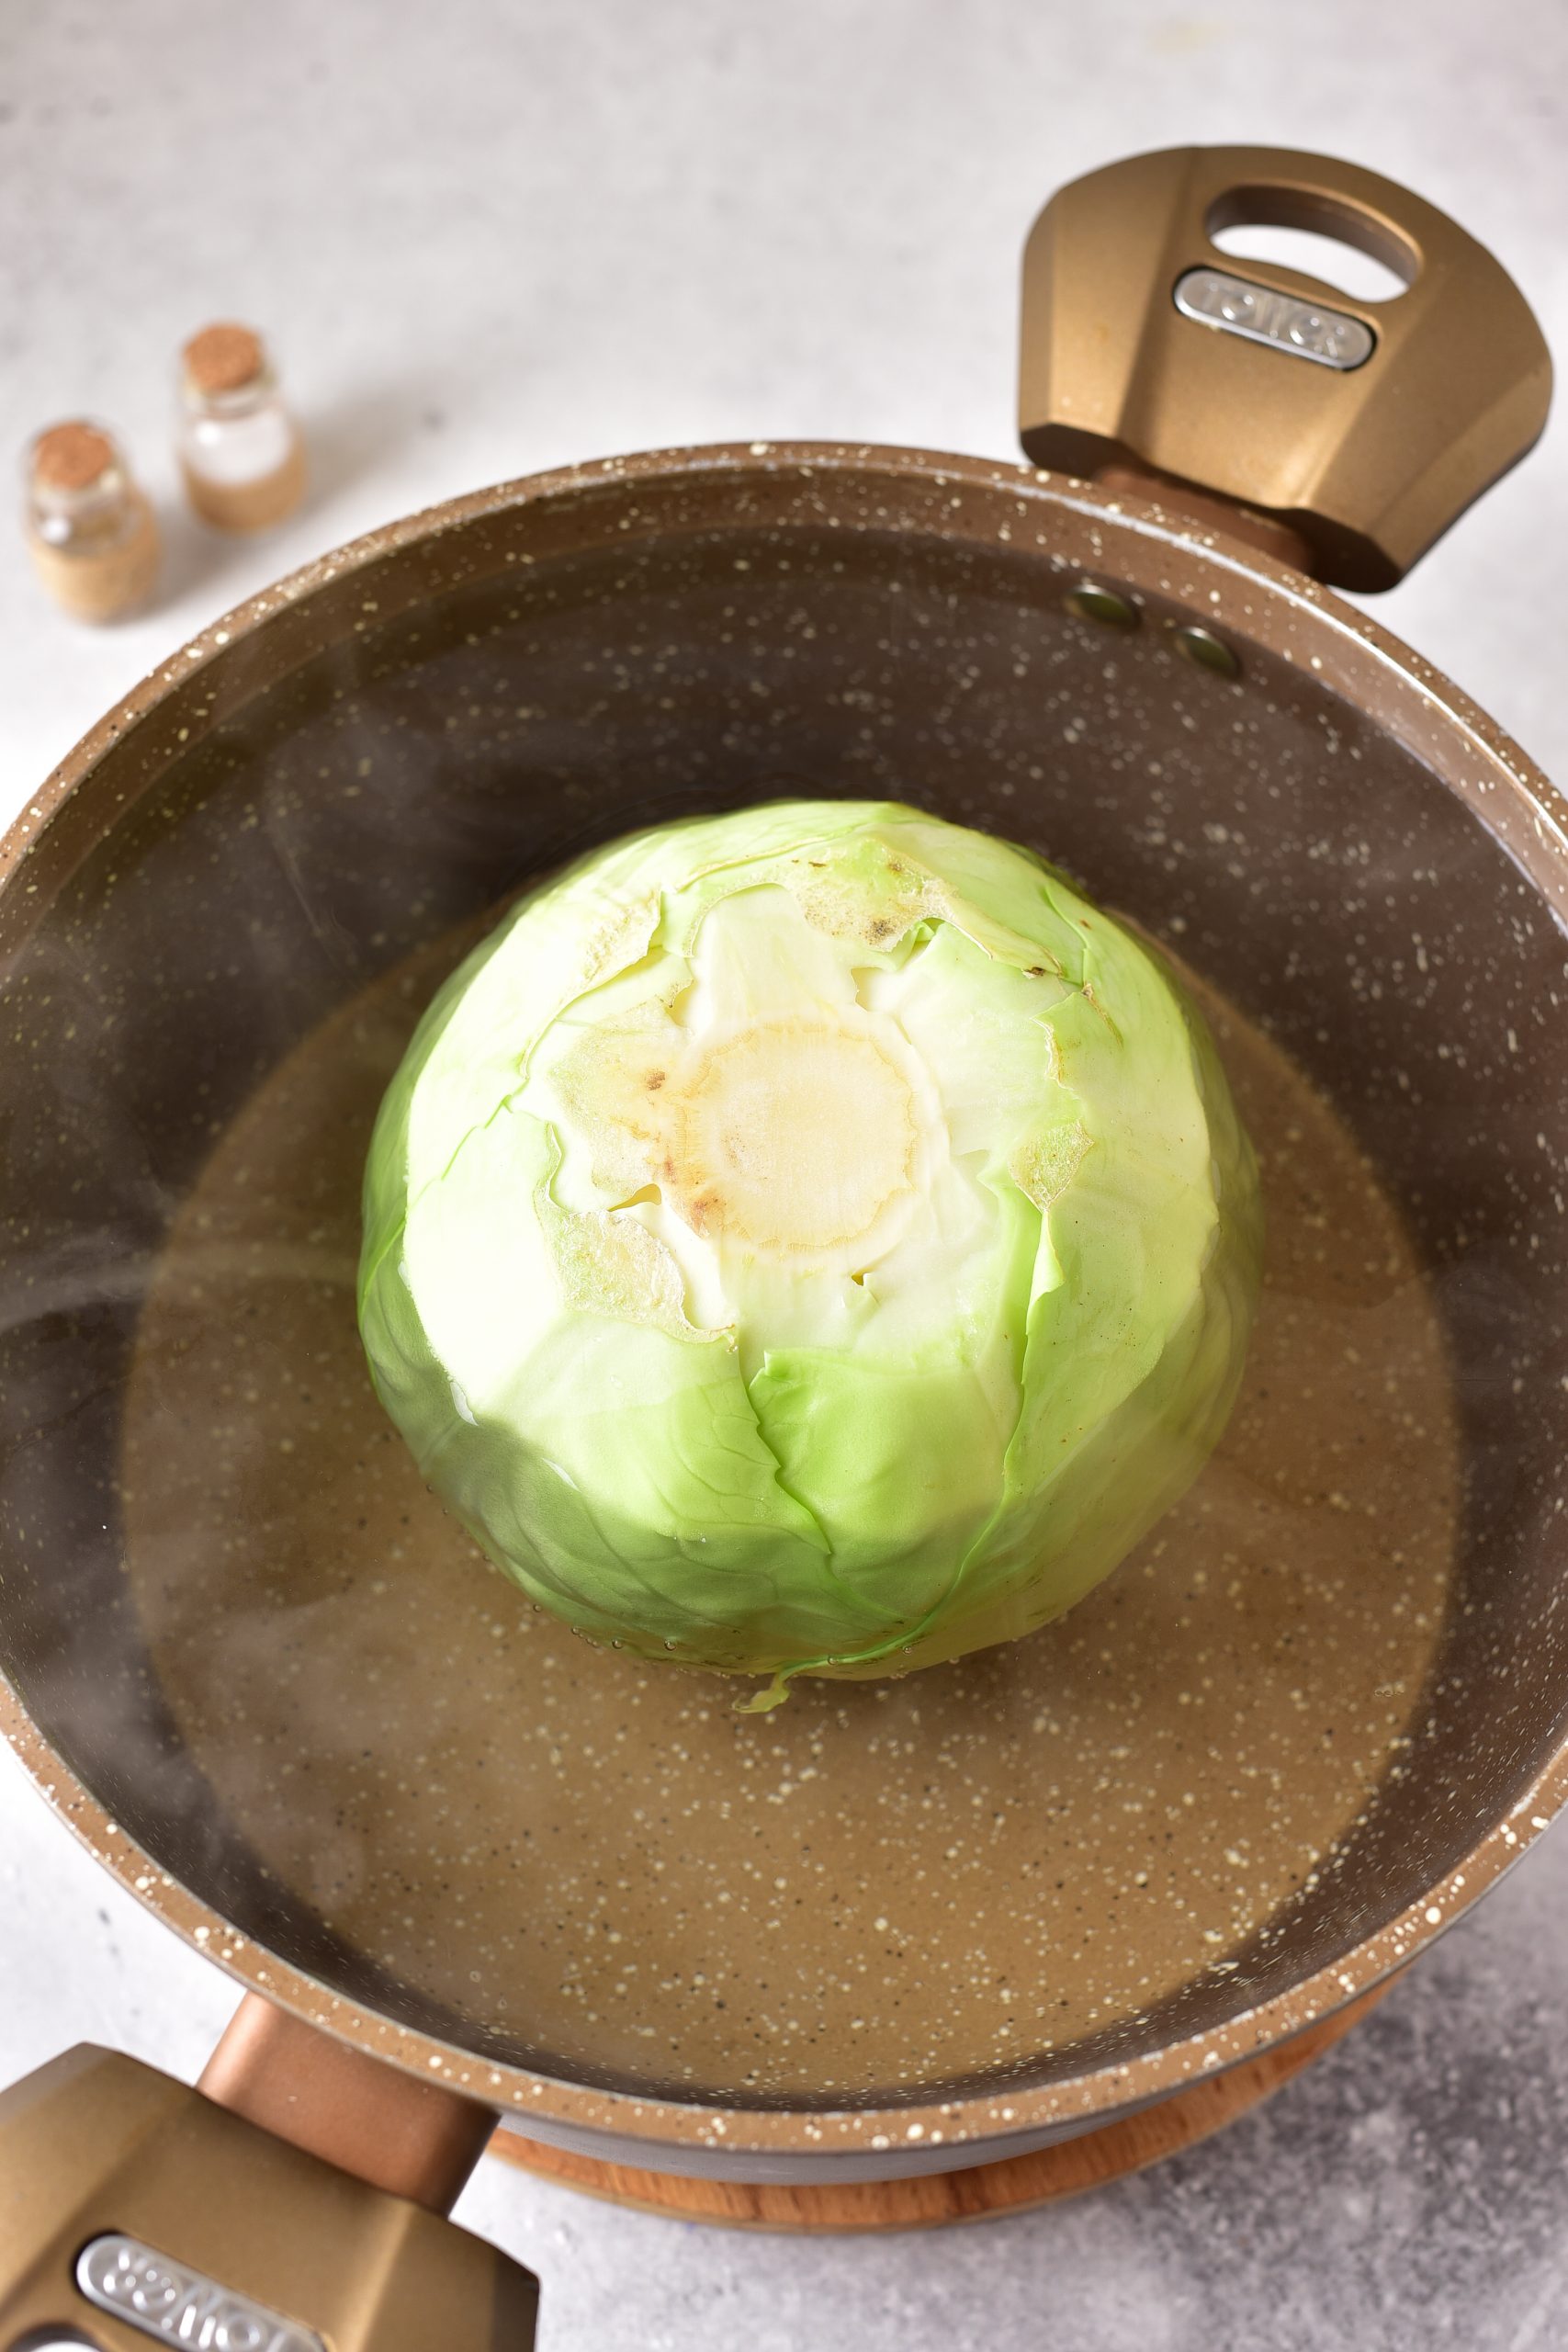 Add the cabbage head to the boiling water, and cook for about 8 minutes, until the leaves are softened a bit. 